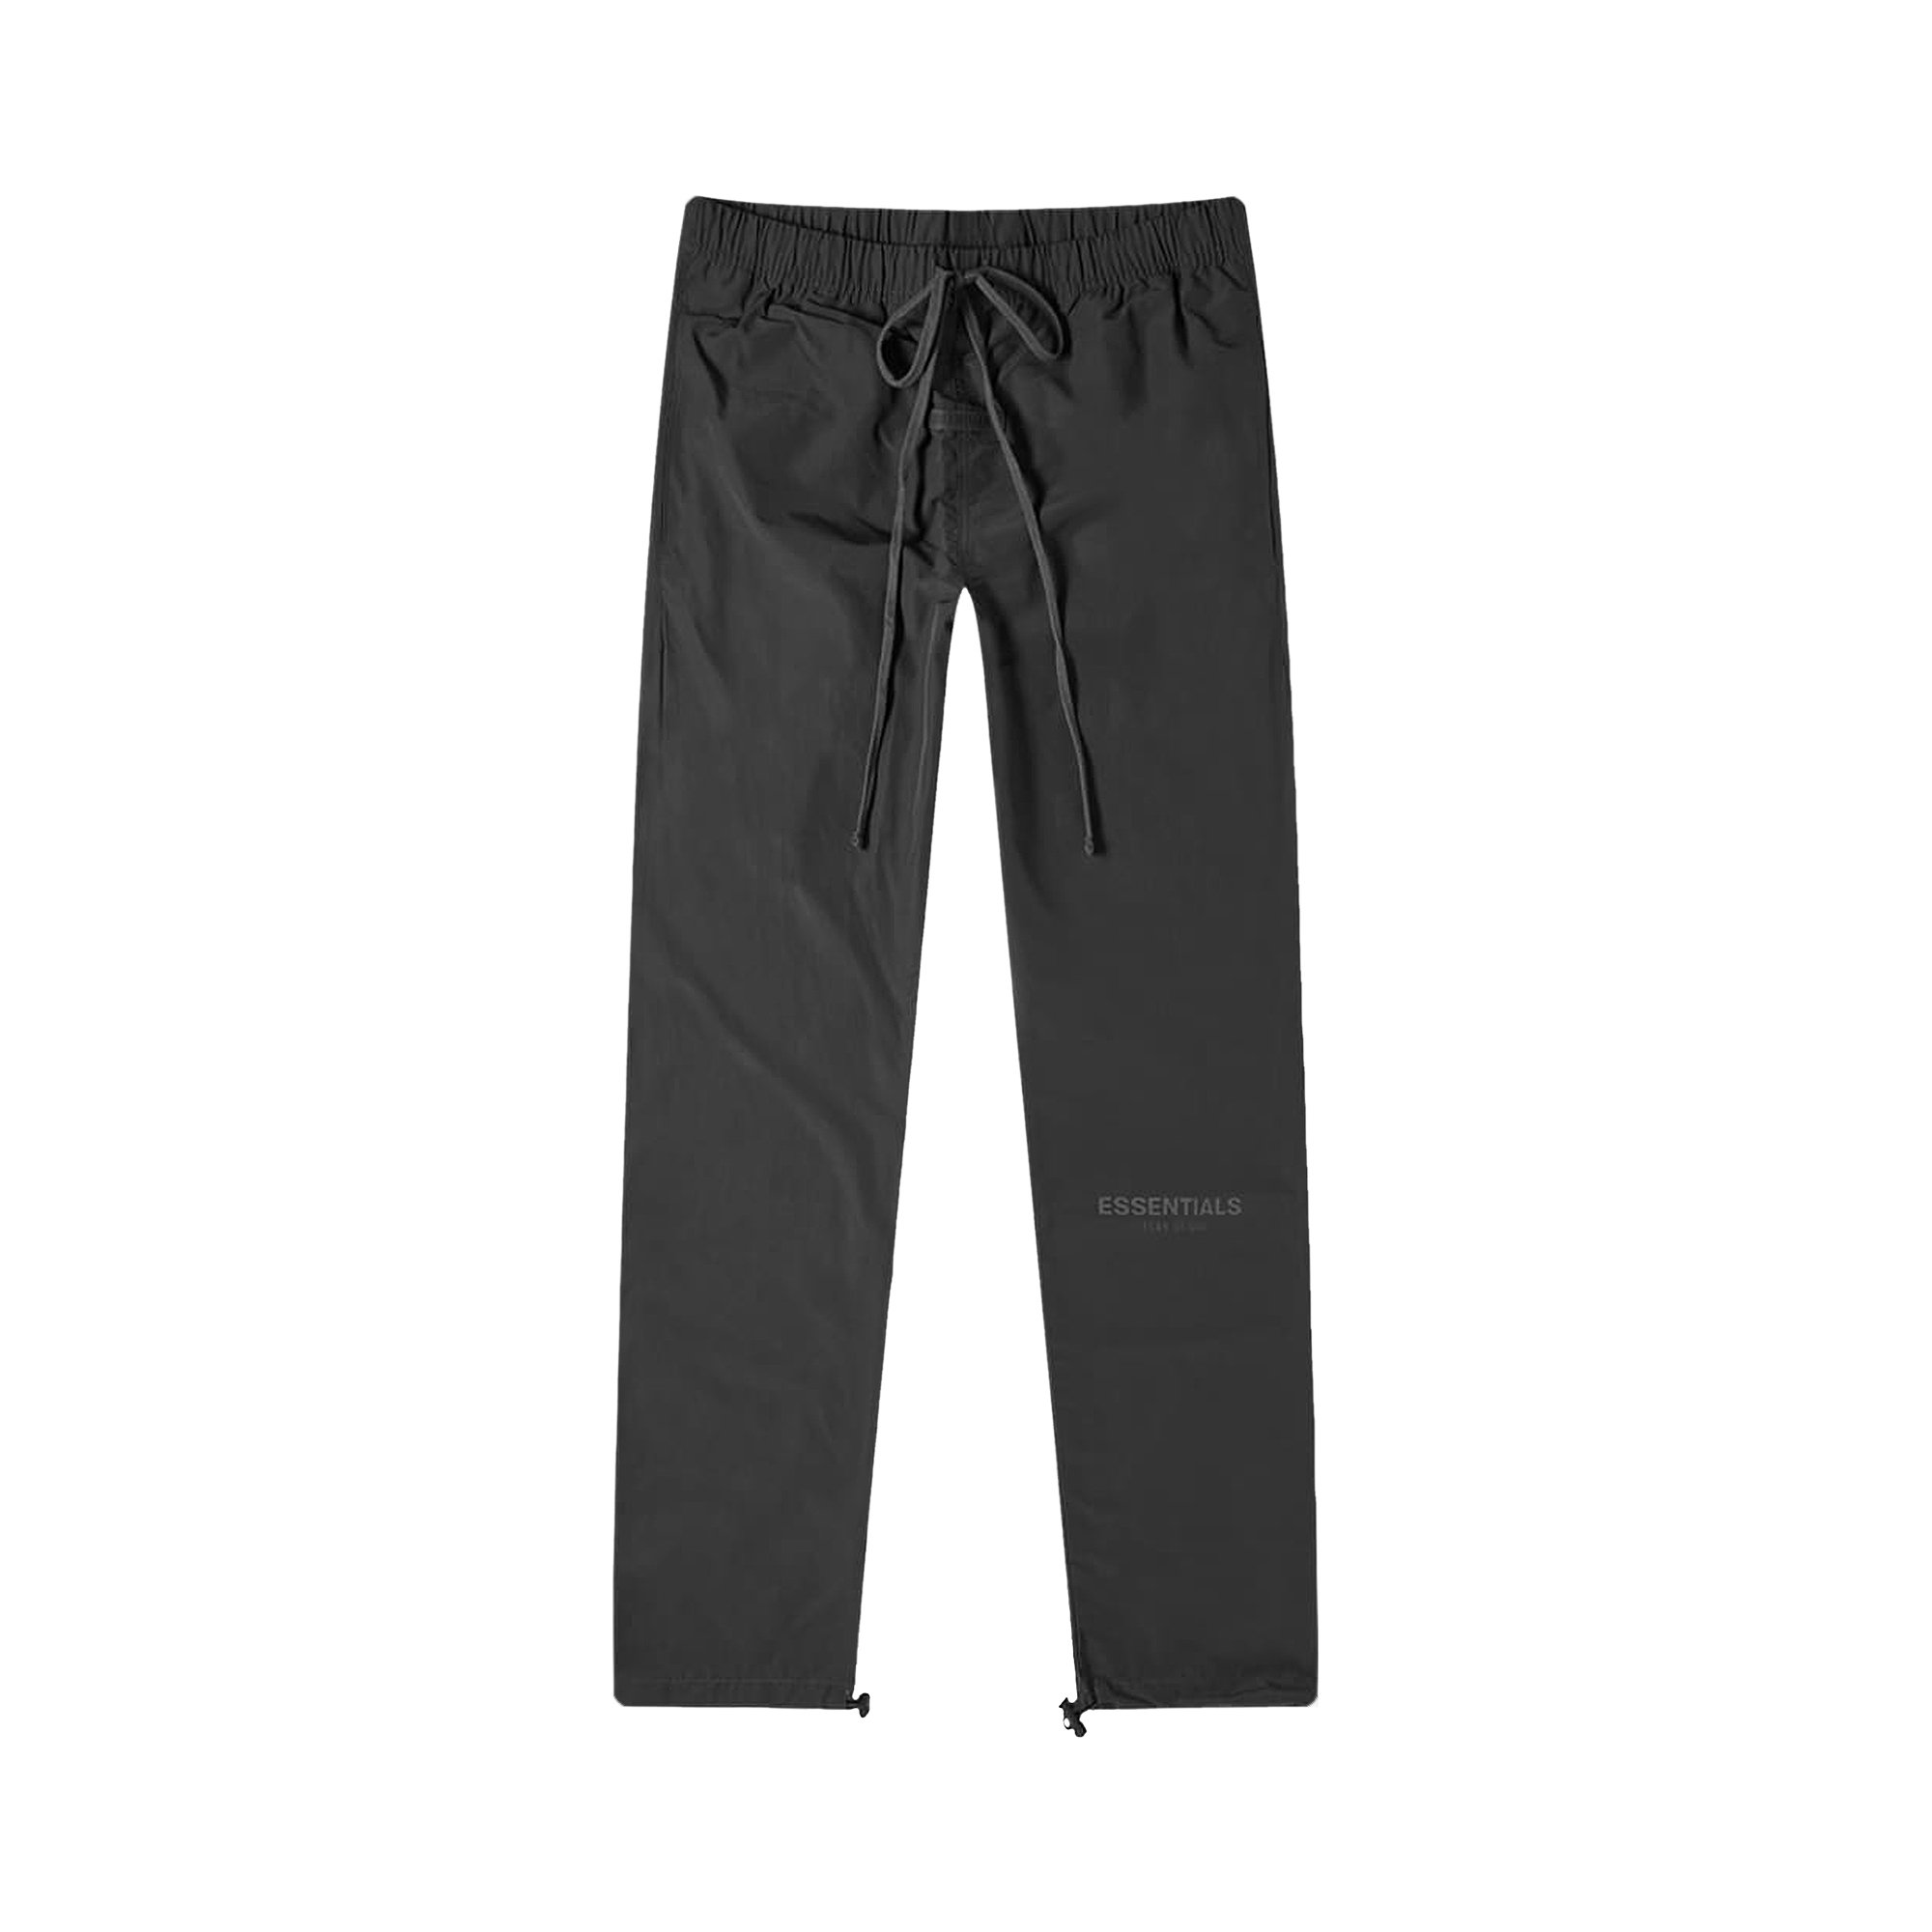 FEAR OF GOD TRACK PANTS Small blackその他